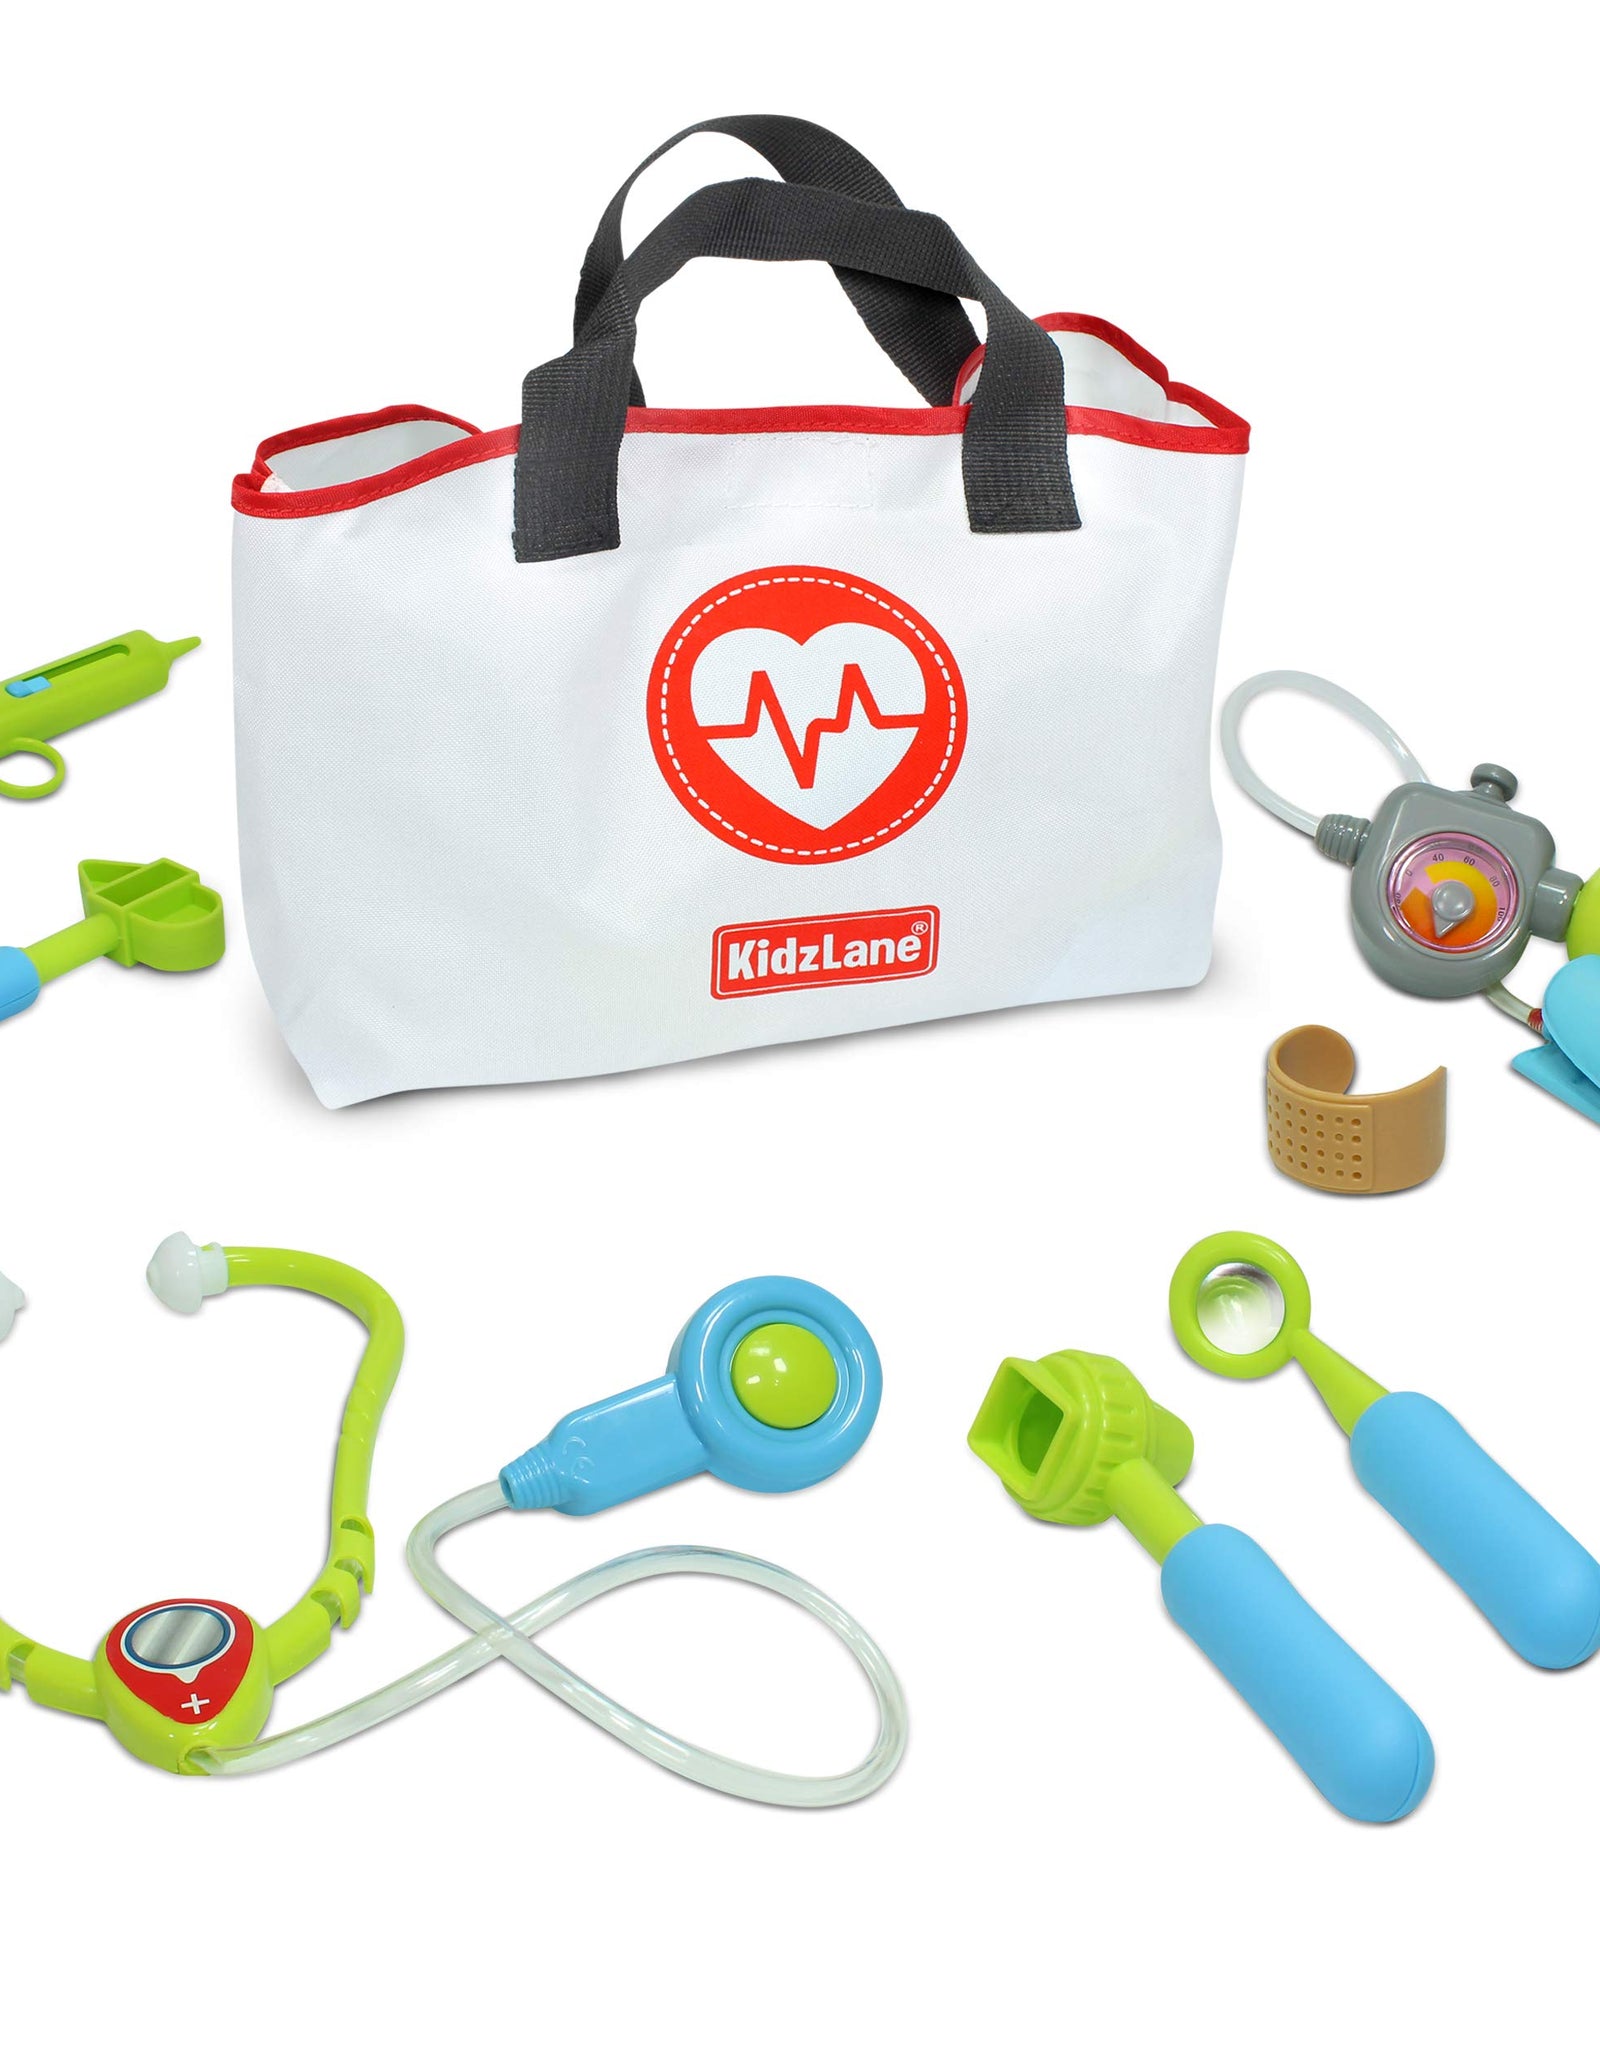 Kidzlane Play Doctor Kit for Kids and Toddlers - Kids Doctor Play Set - 7 Piece Dr Set with Medical Storage Bag and Electronic Stethoscope for Kids - Ages 3+